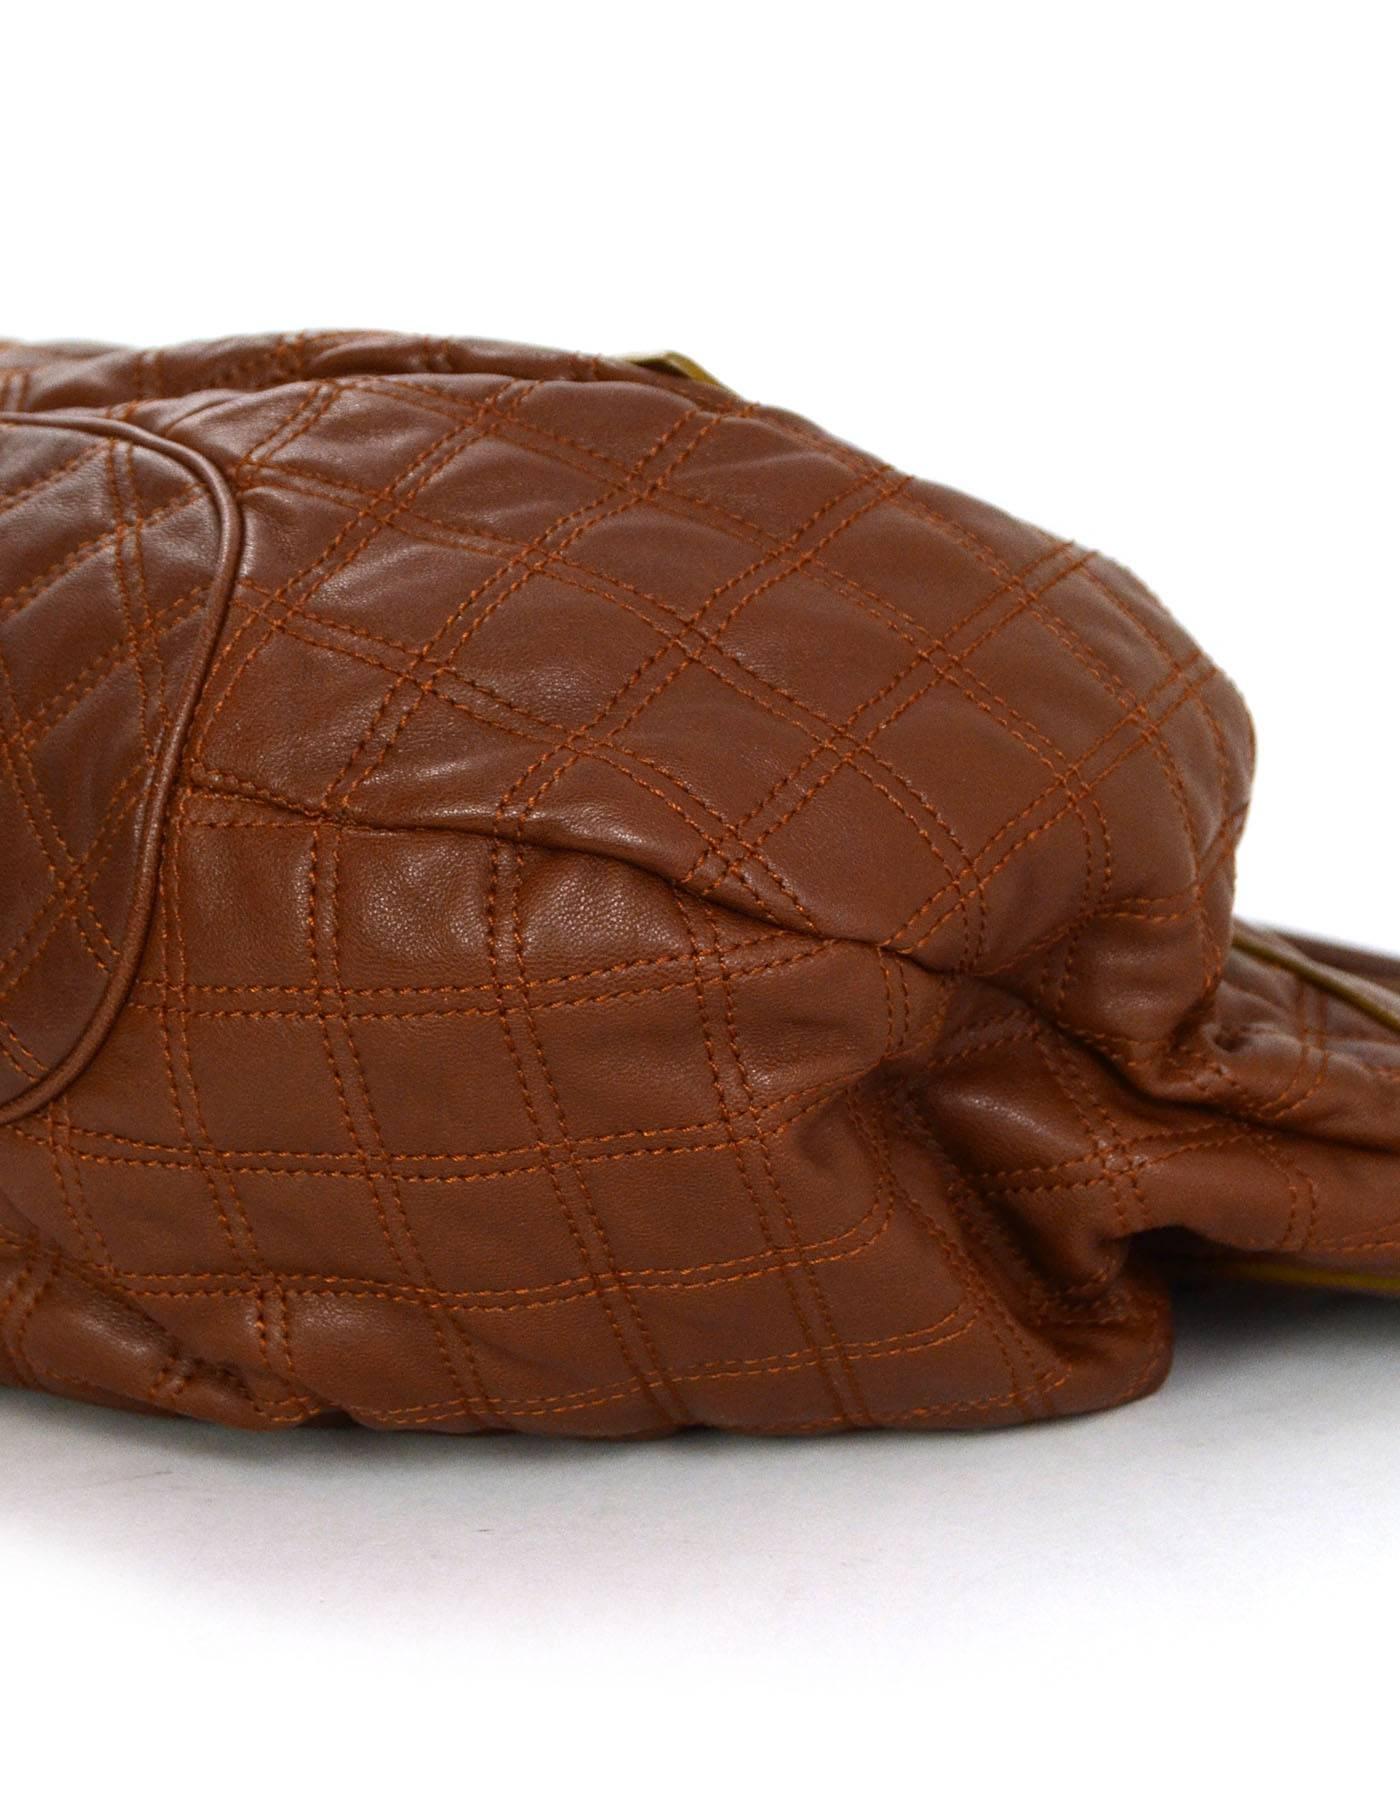 Marc Jacobs Brown Quilted Leather Tote Bag GHW 1